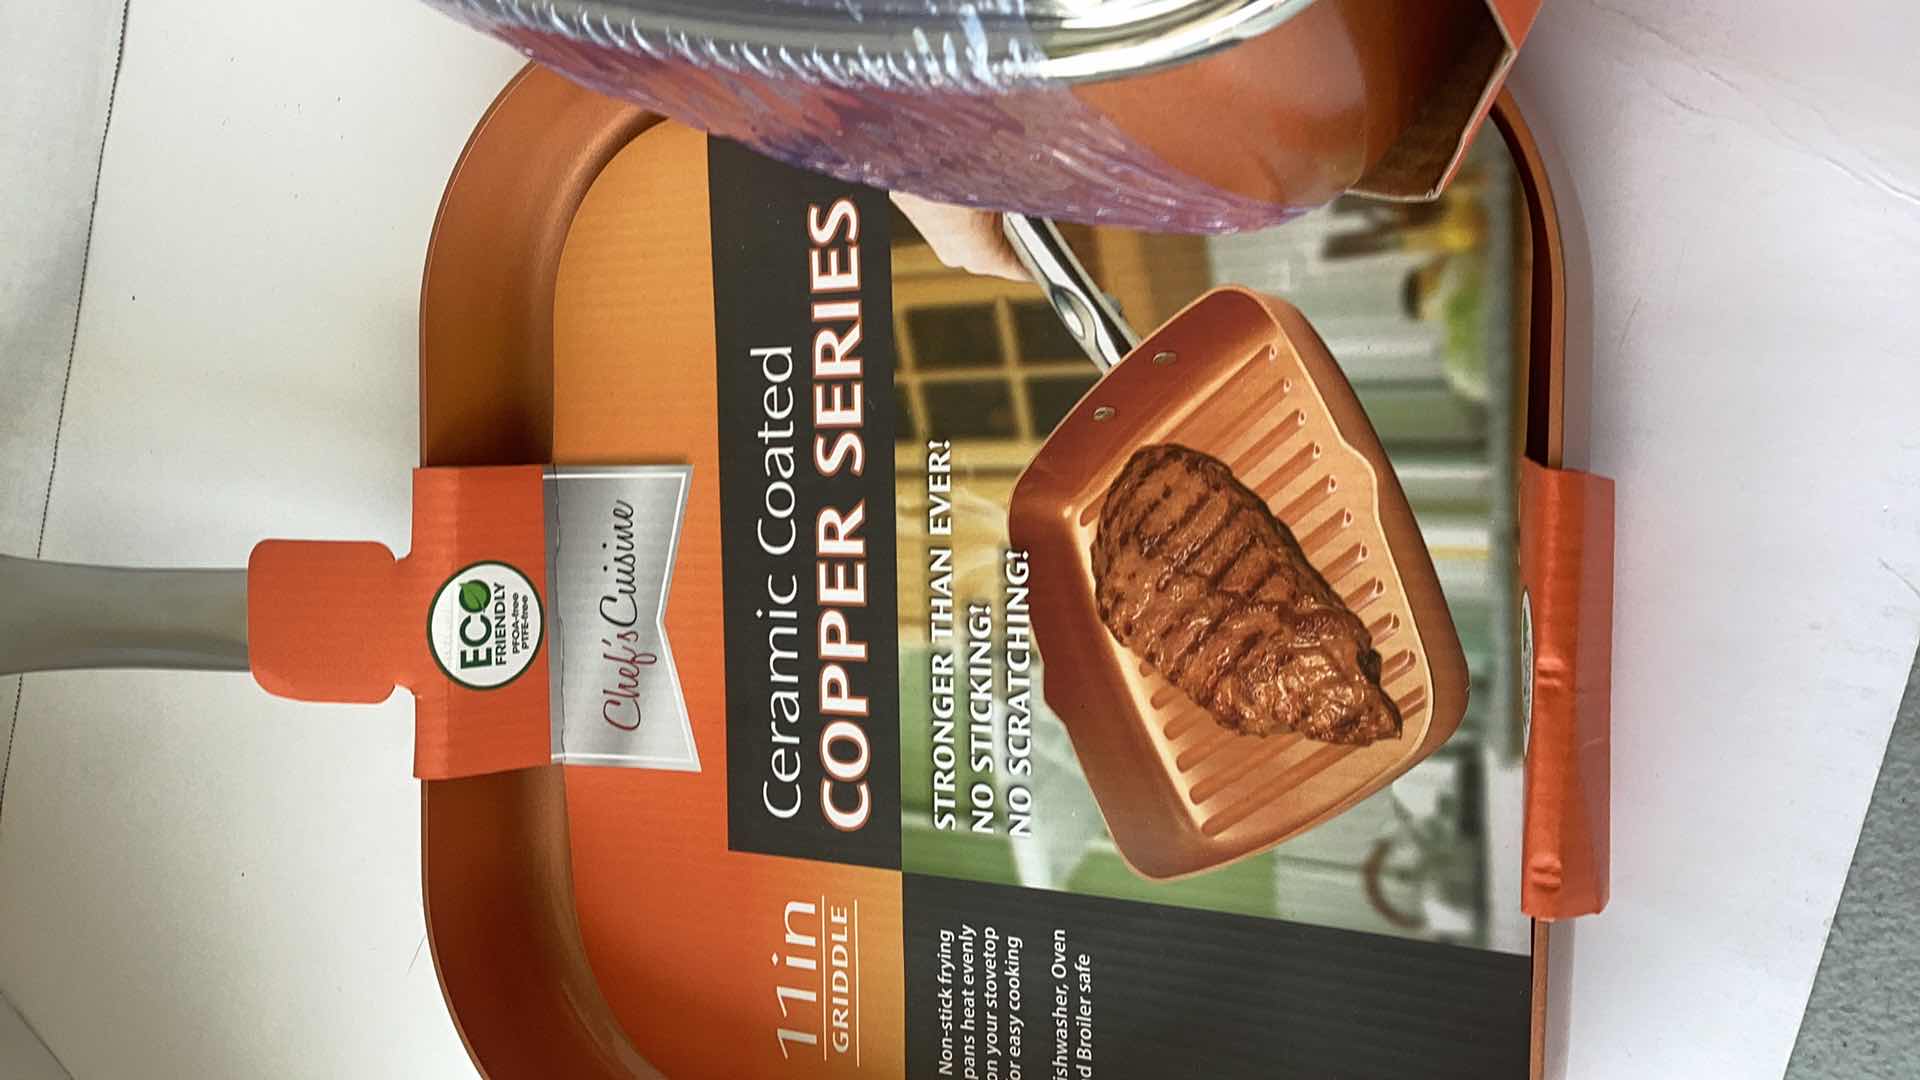 Photo 2 of CHEF’S CUISINE CERAMIC COATED COPPER COOKWARE BRAND NEW